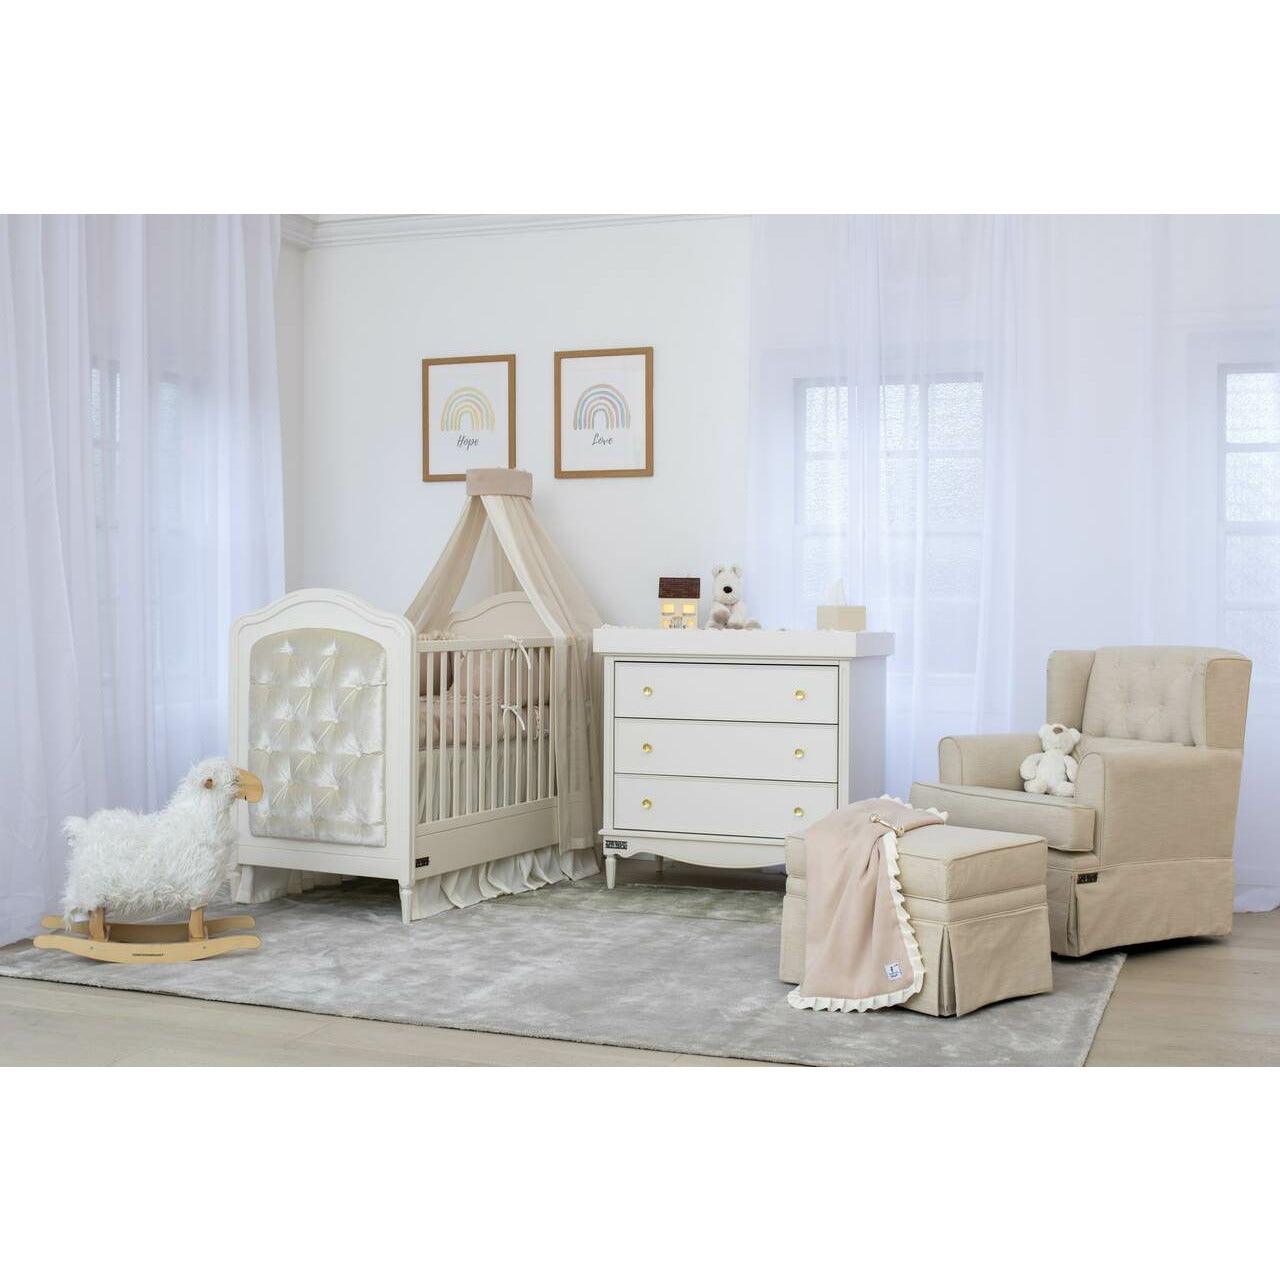 Tribeca Changing Unit - The Baby Cot Shop, Chelsea